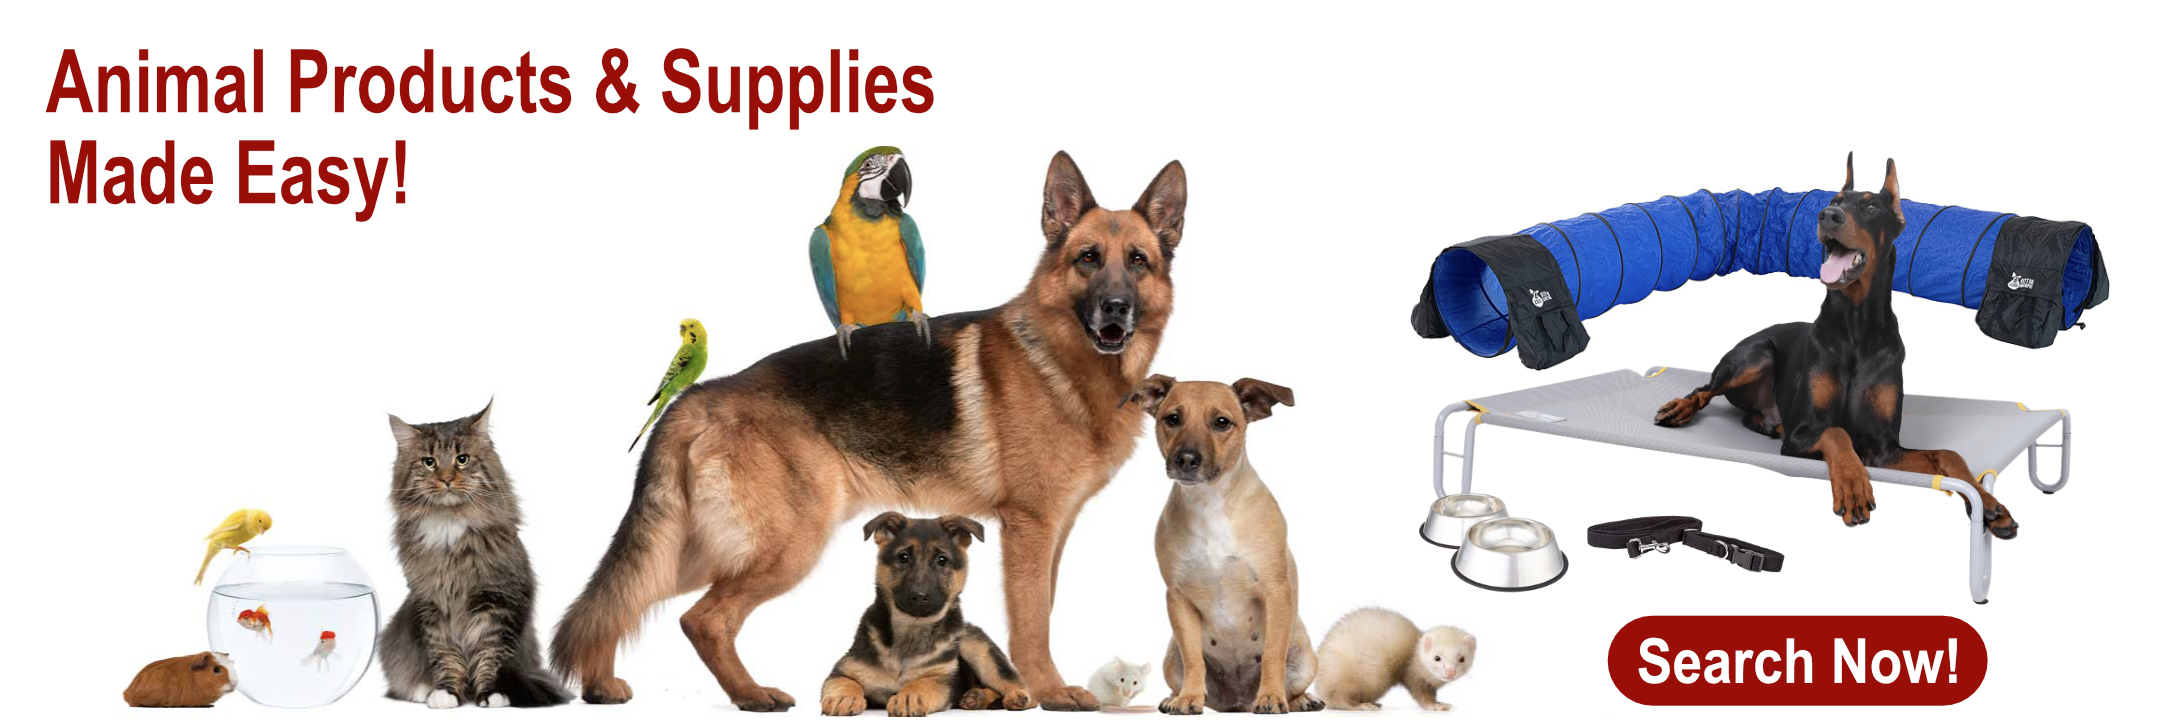 Products & Supplies | MunroKennels.com mk-100904 2160x720